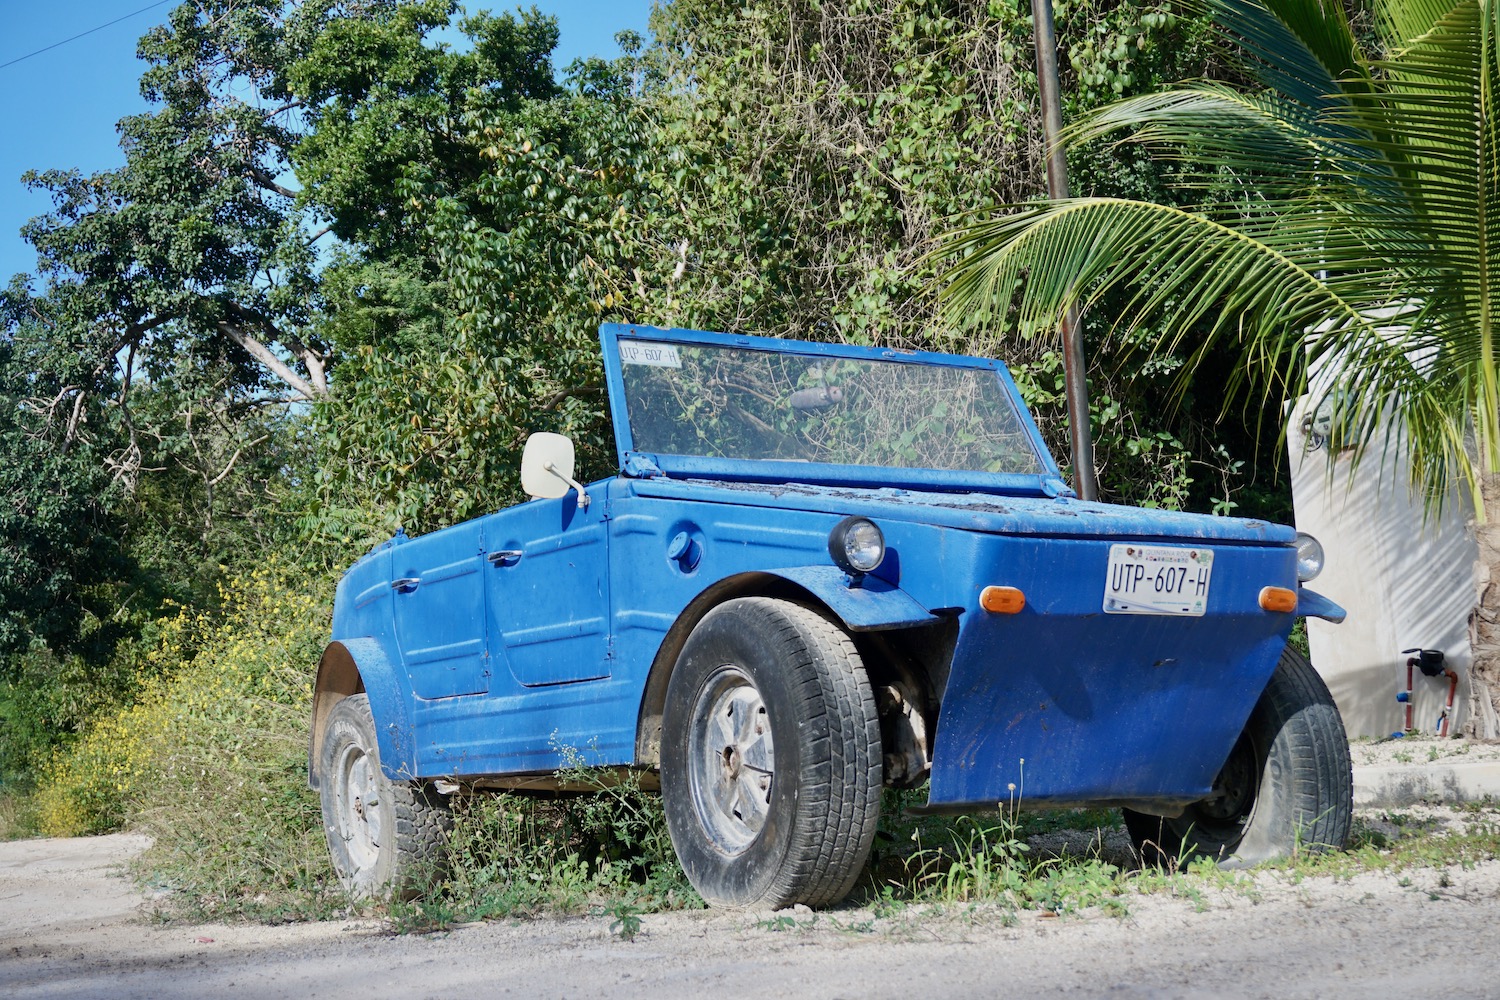 A bright blue Volkswagen Thing off-roader parked in front of a palm tree in Mexico.